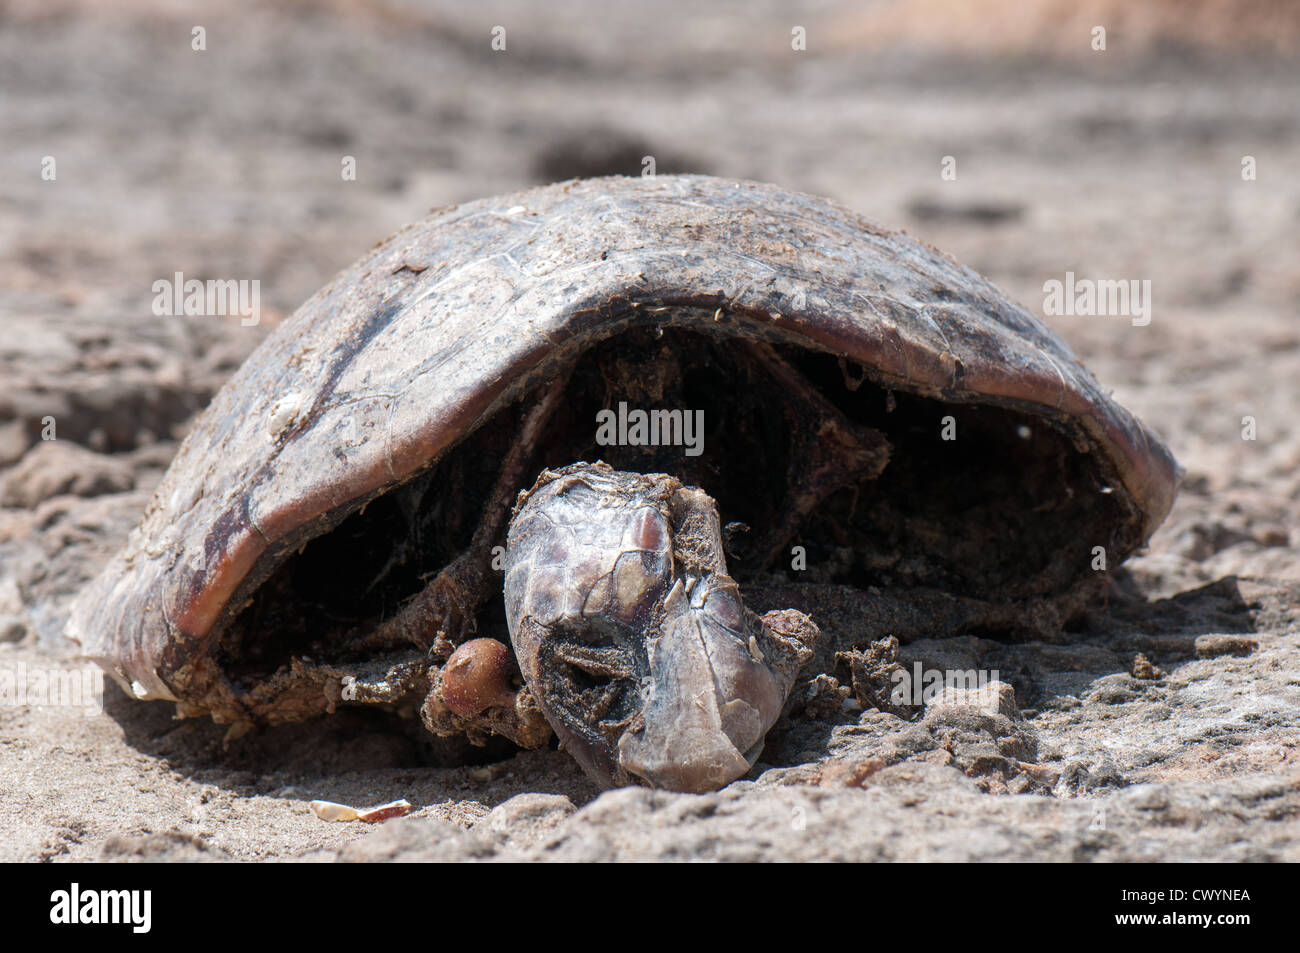 Mass Animal Die-Off concept. A carcase of a Sea Turtle on a beach Stock Photo